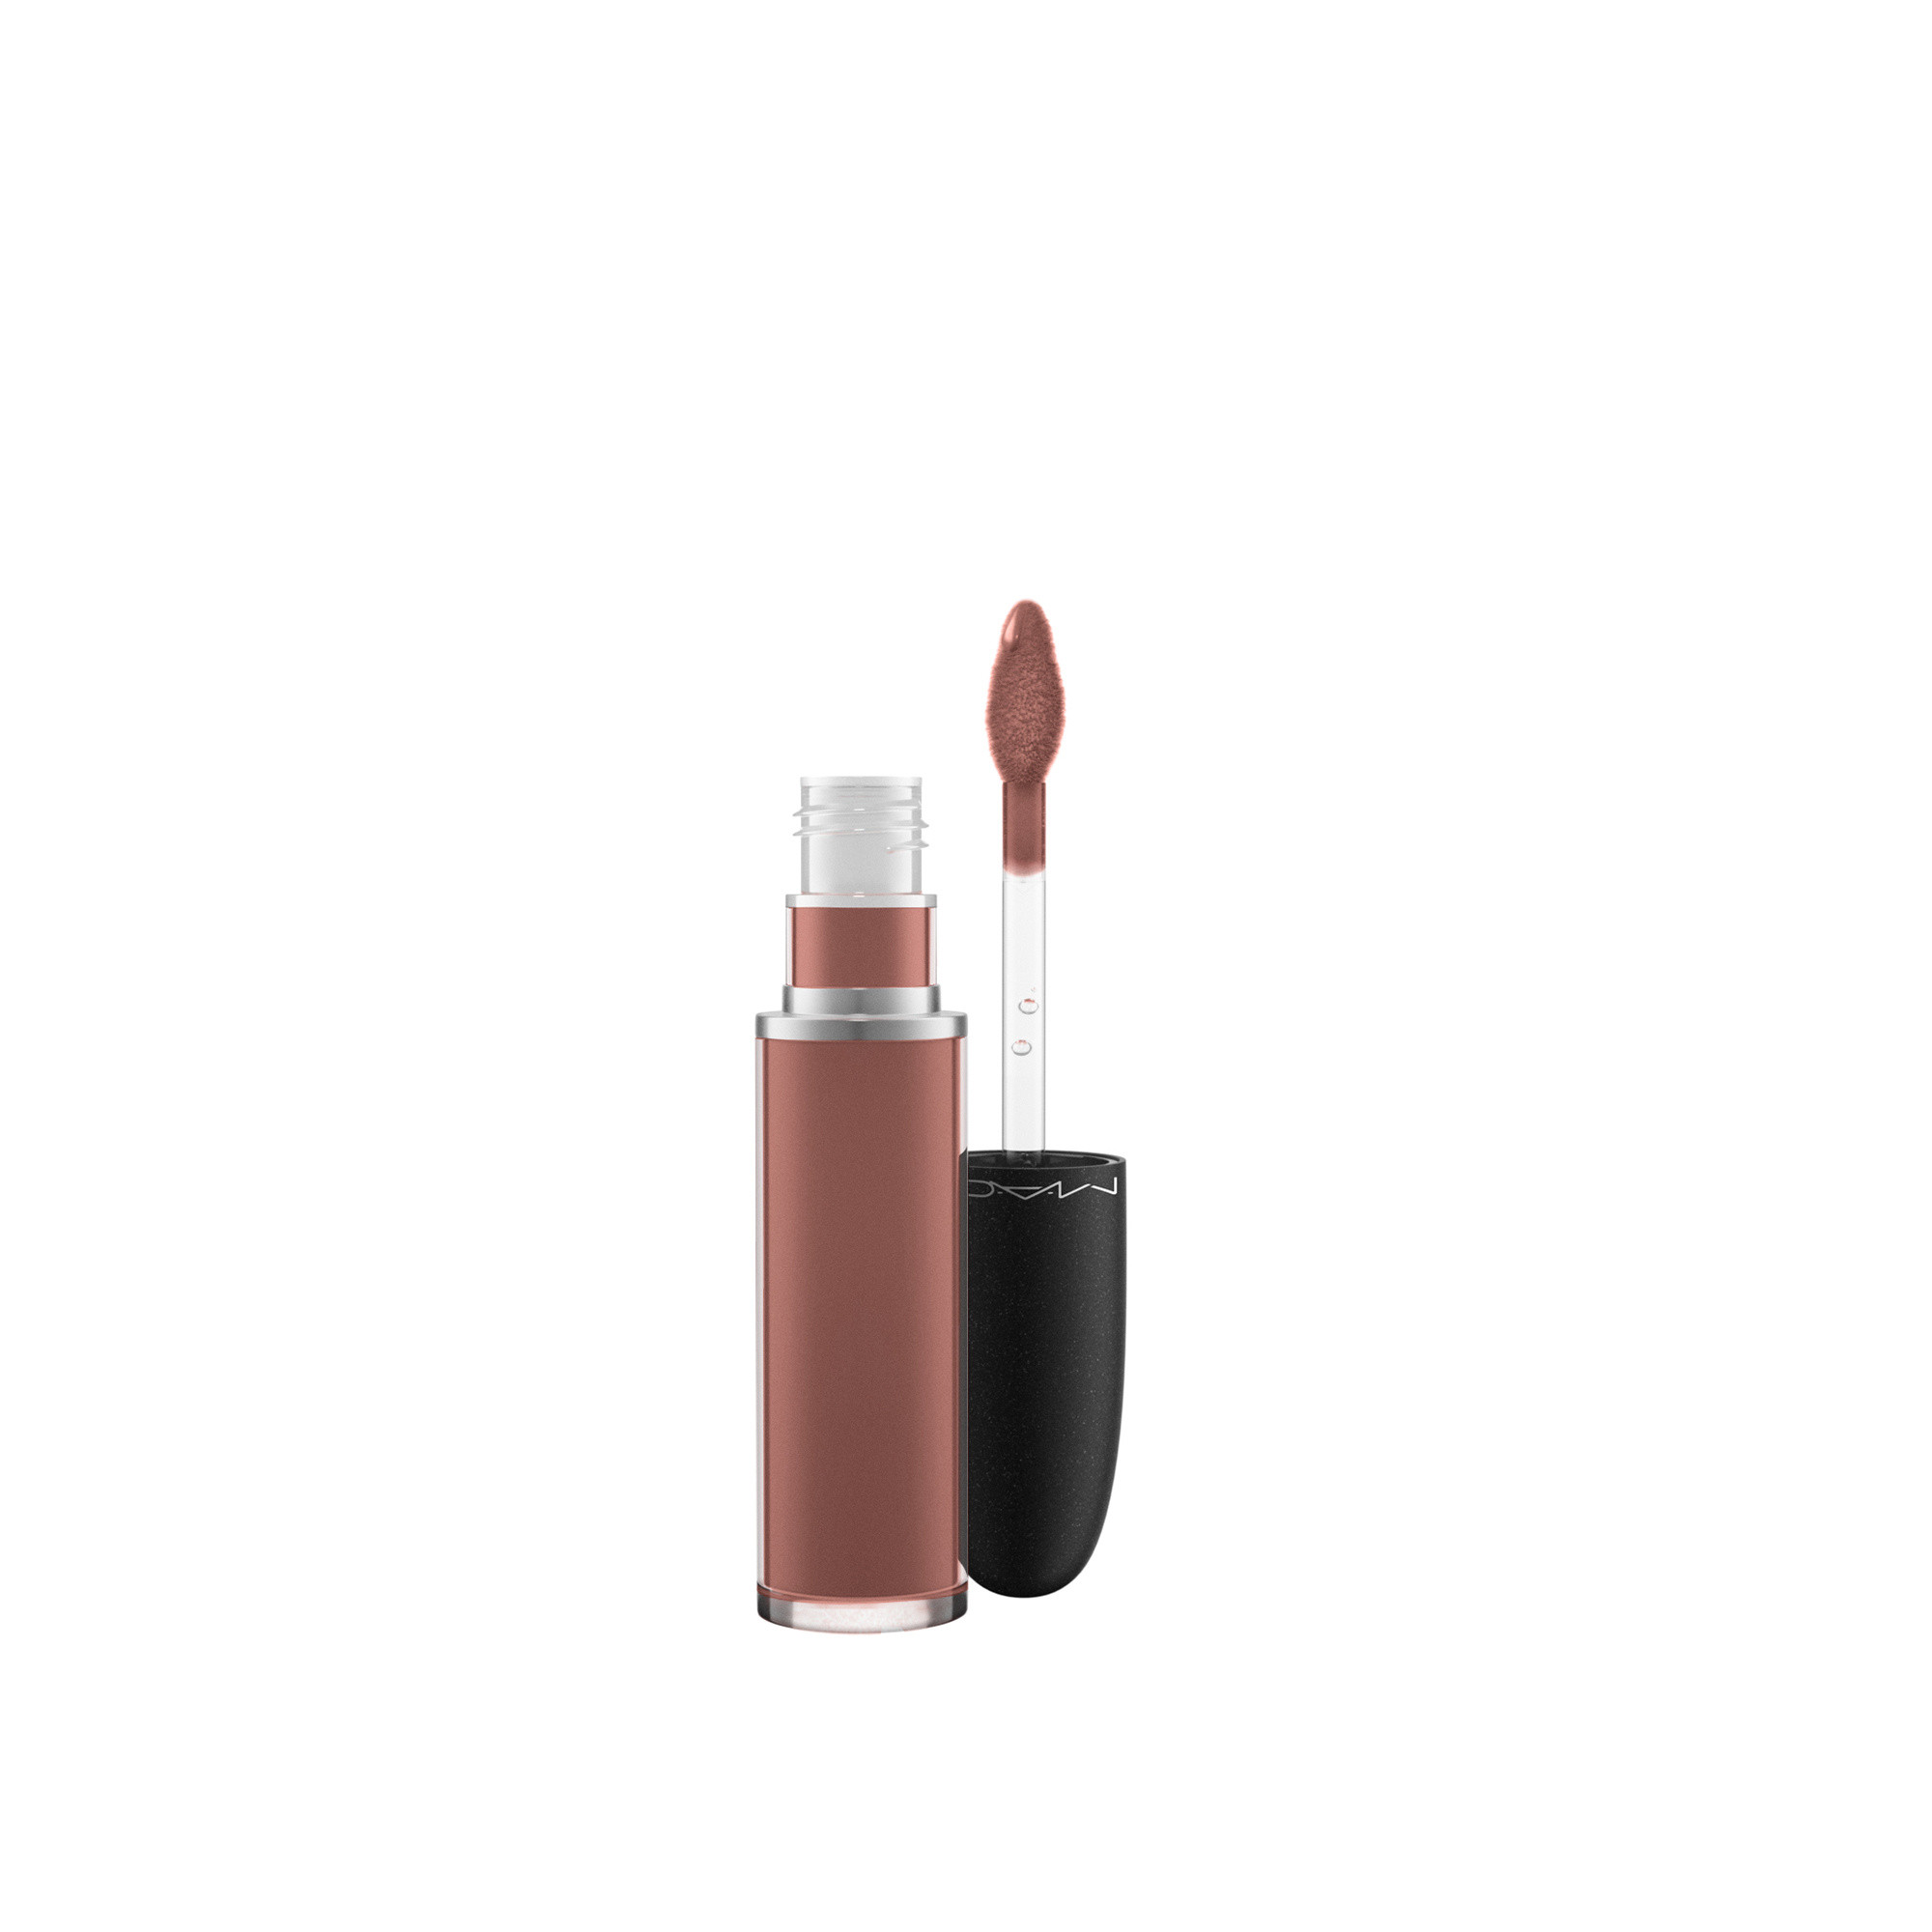 Retro Matte Liquid Lip Colour - Topped With Brandy, TOPPED WITH BRANDY, large image number 0